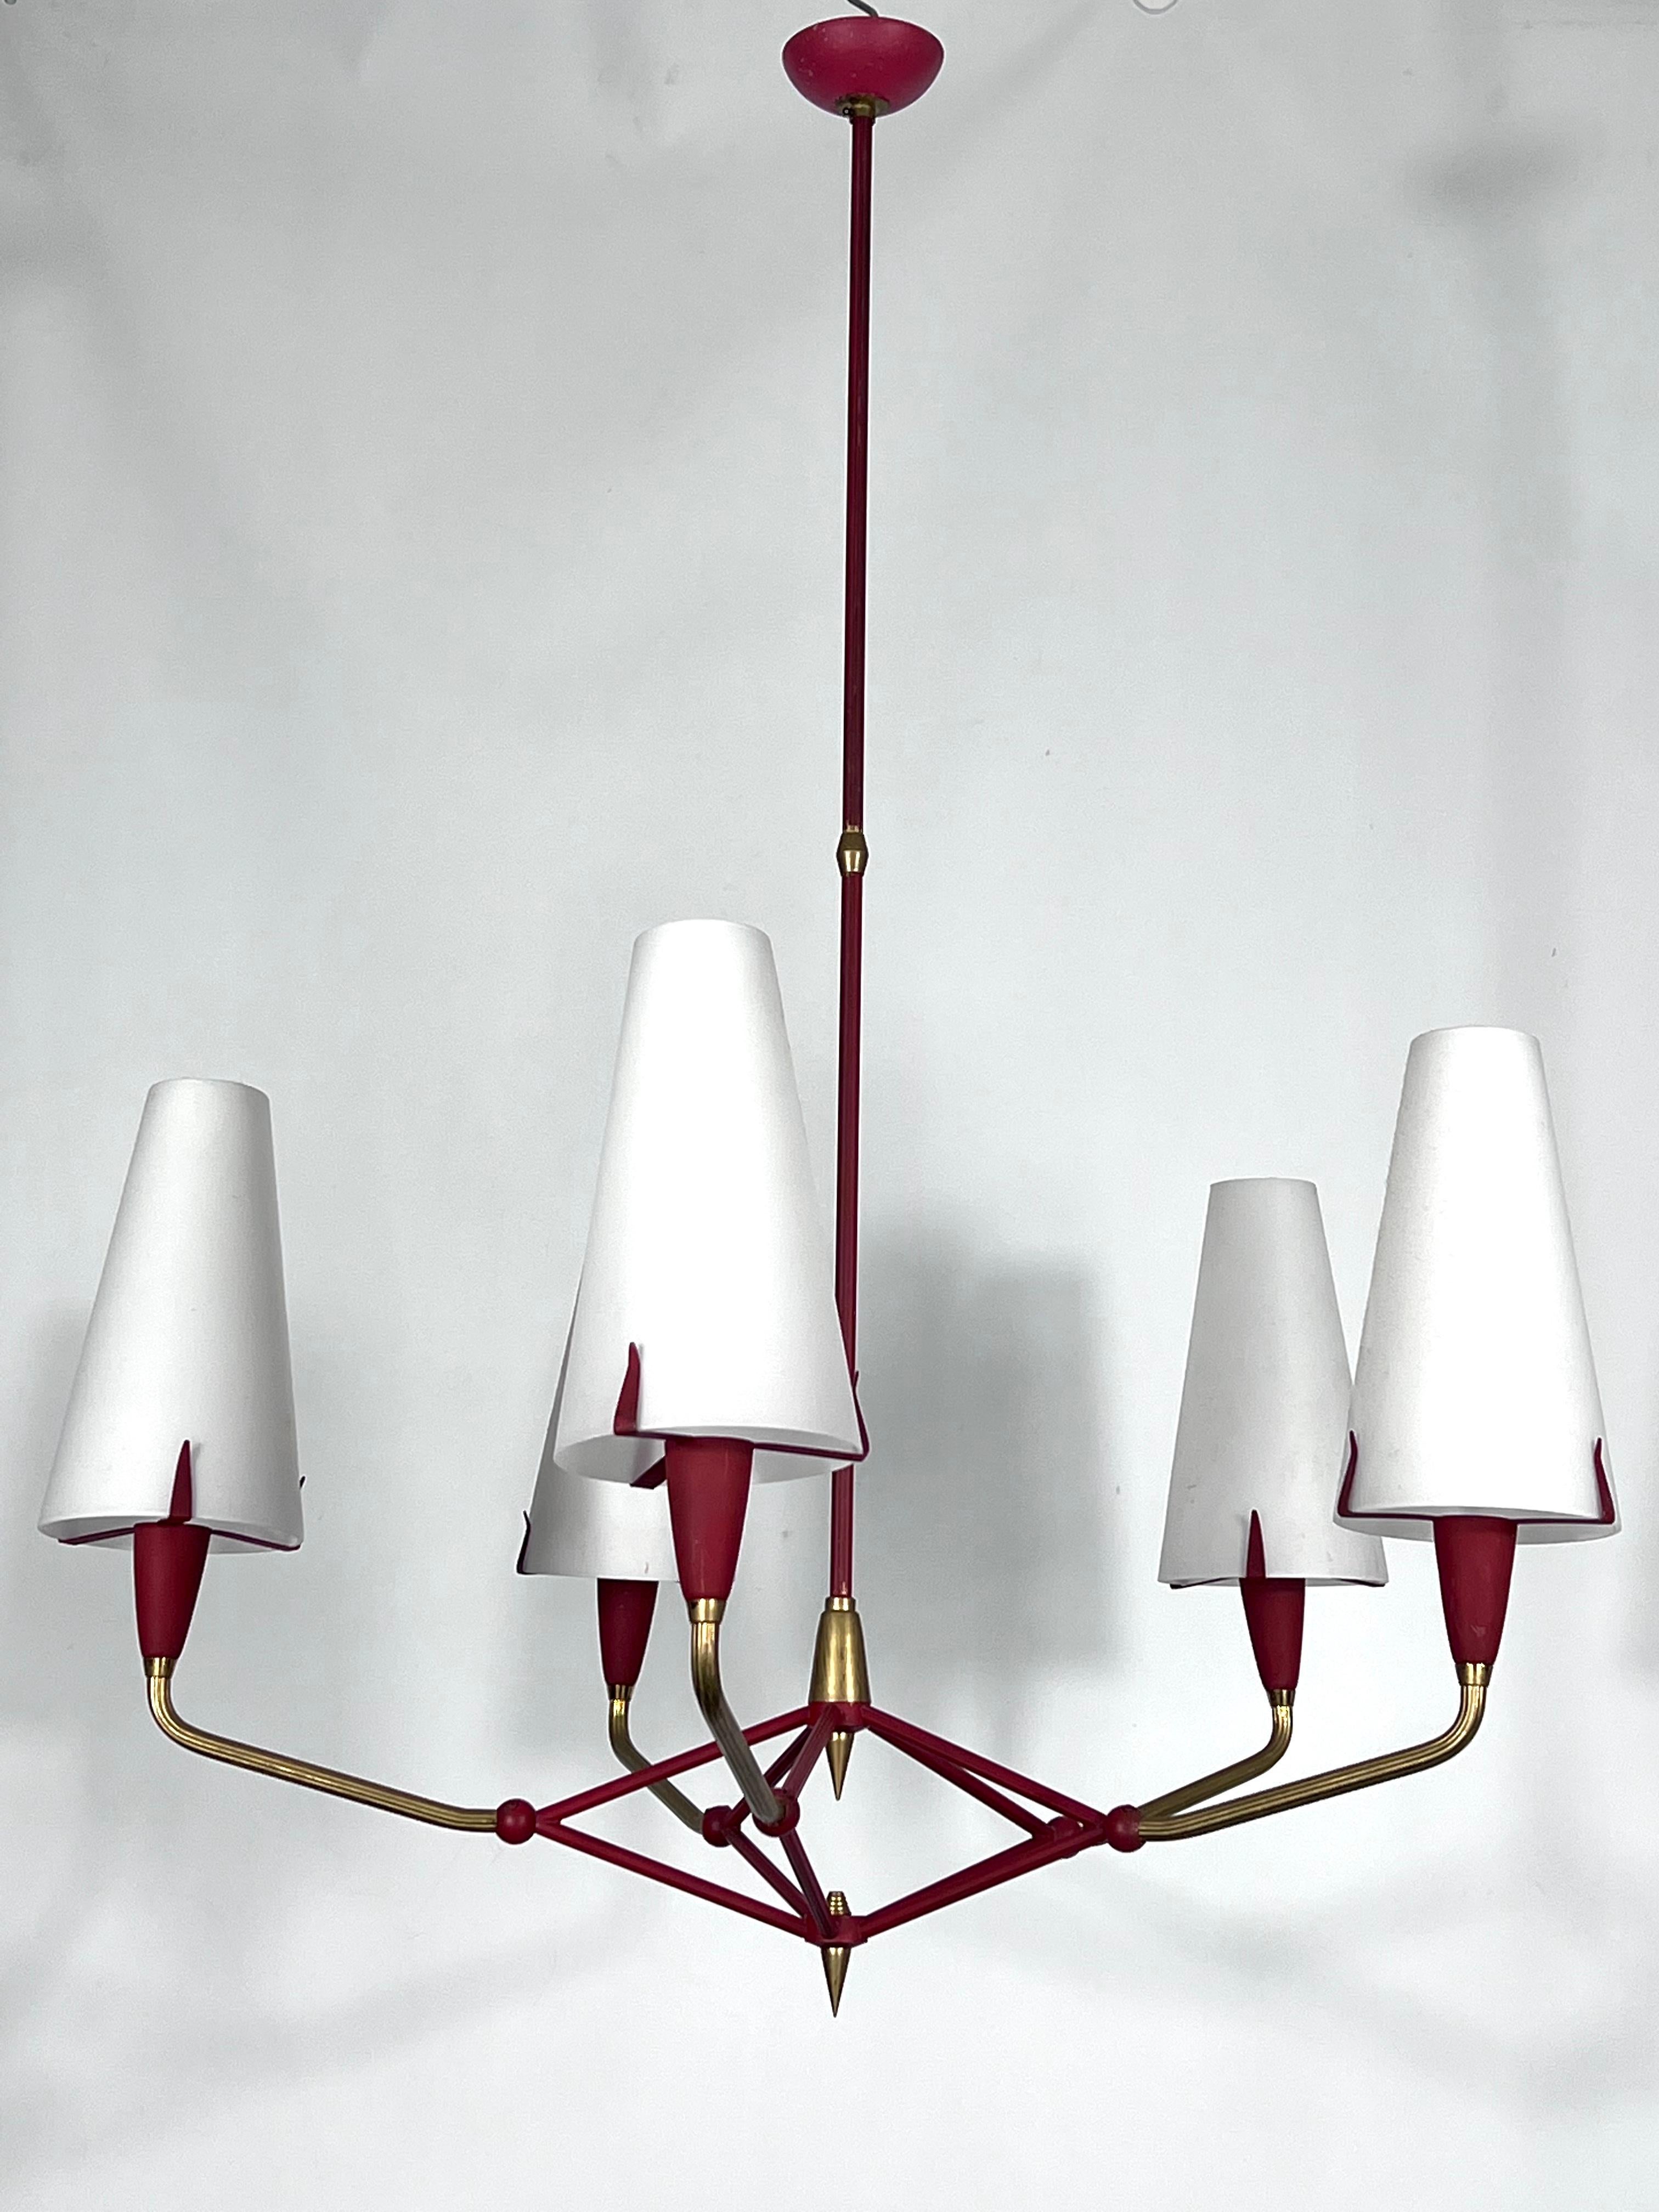 Great vintage original condition with patina on the brass and trace of age and use for this rare large chandelier attributable to Stilnovo and produced in Italy during the 50s. It is made from brass, red lacquer and duplex opaline glass with no